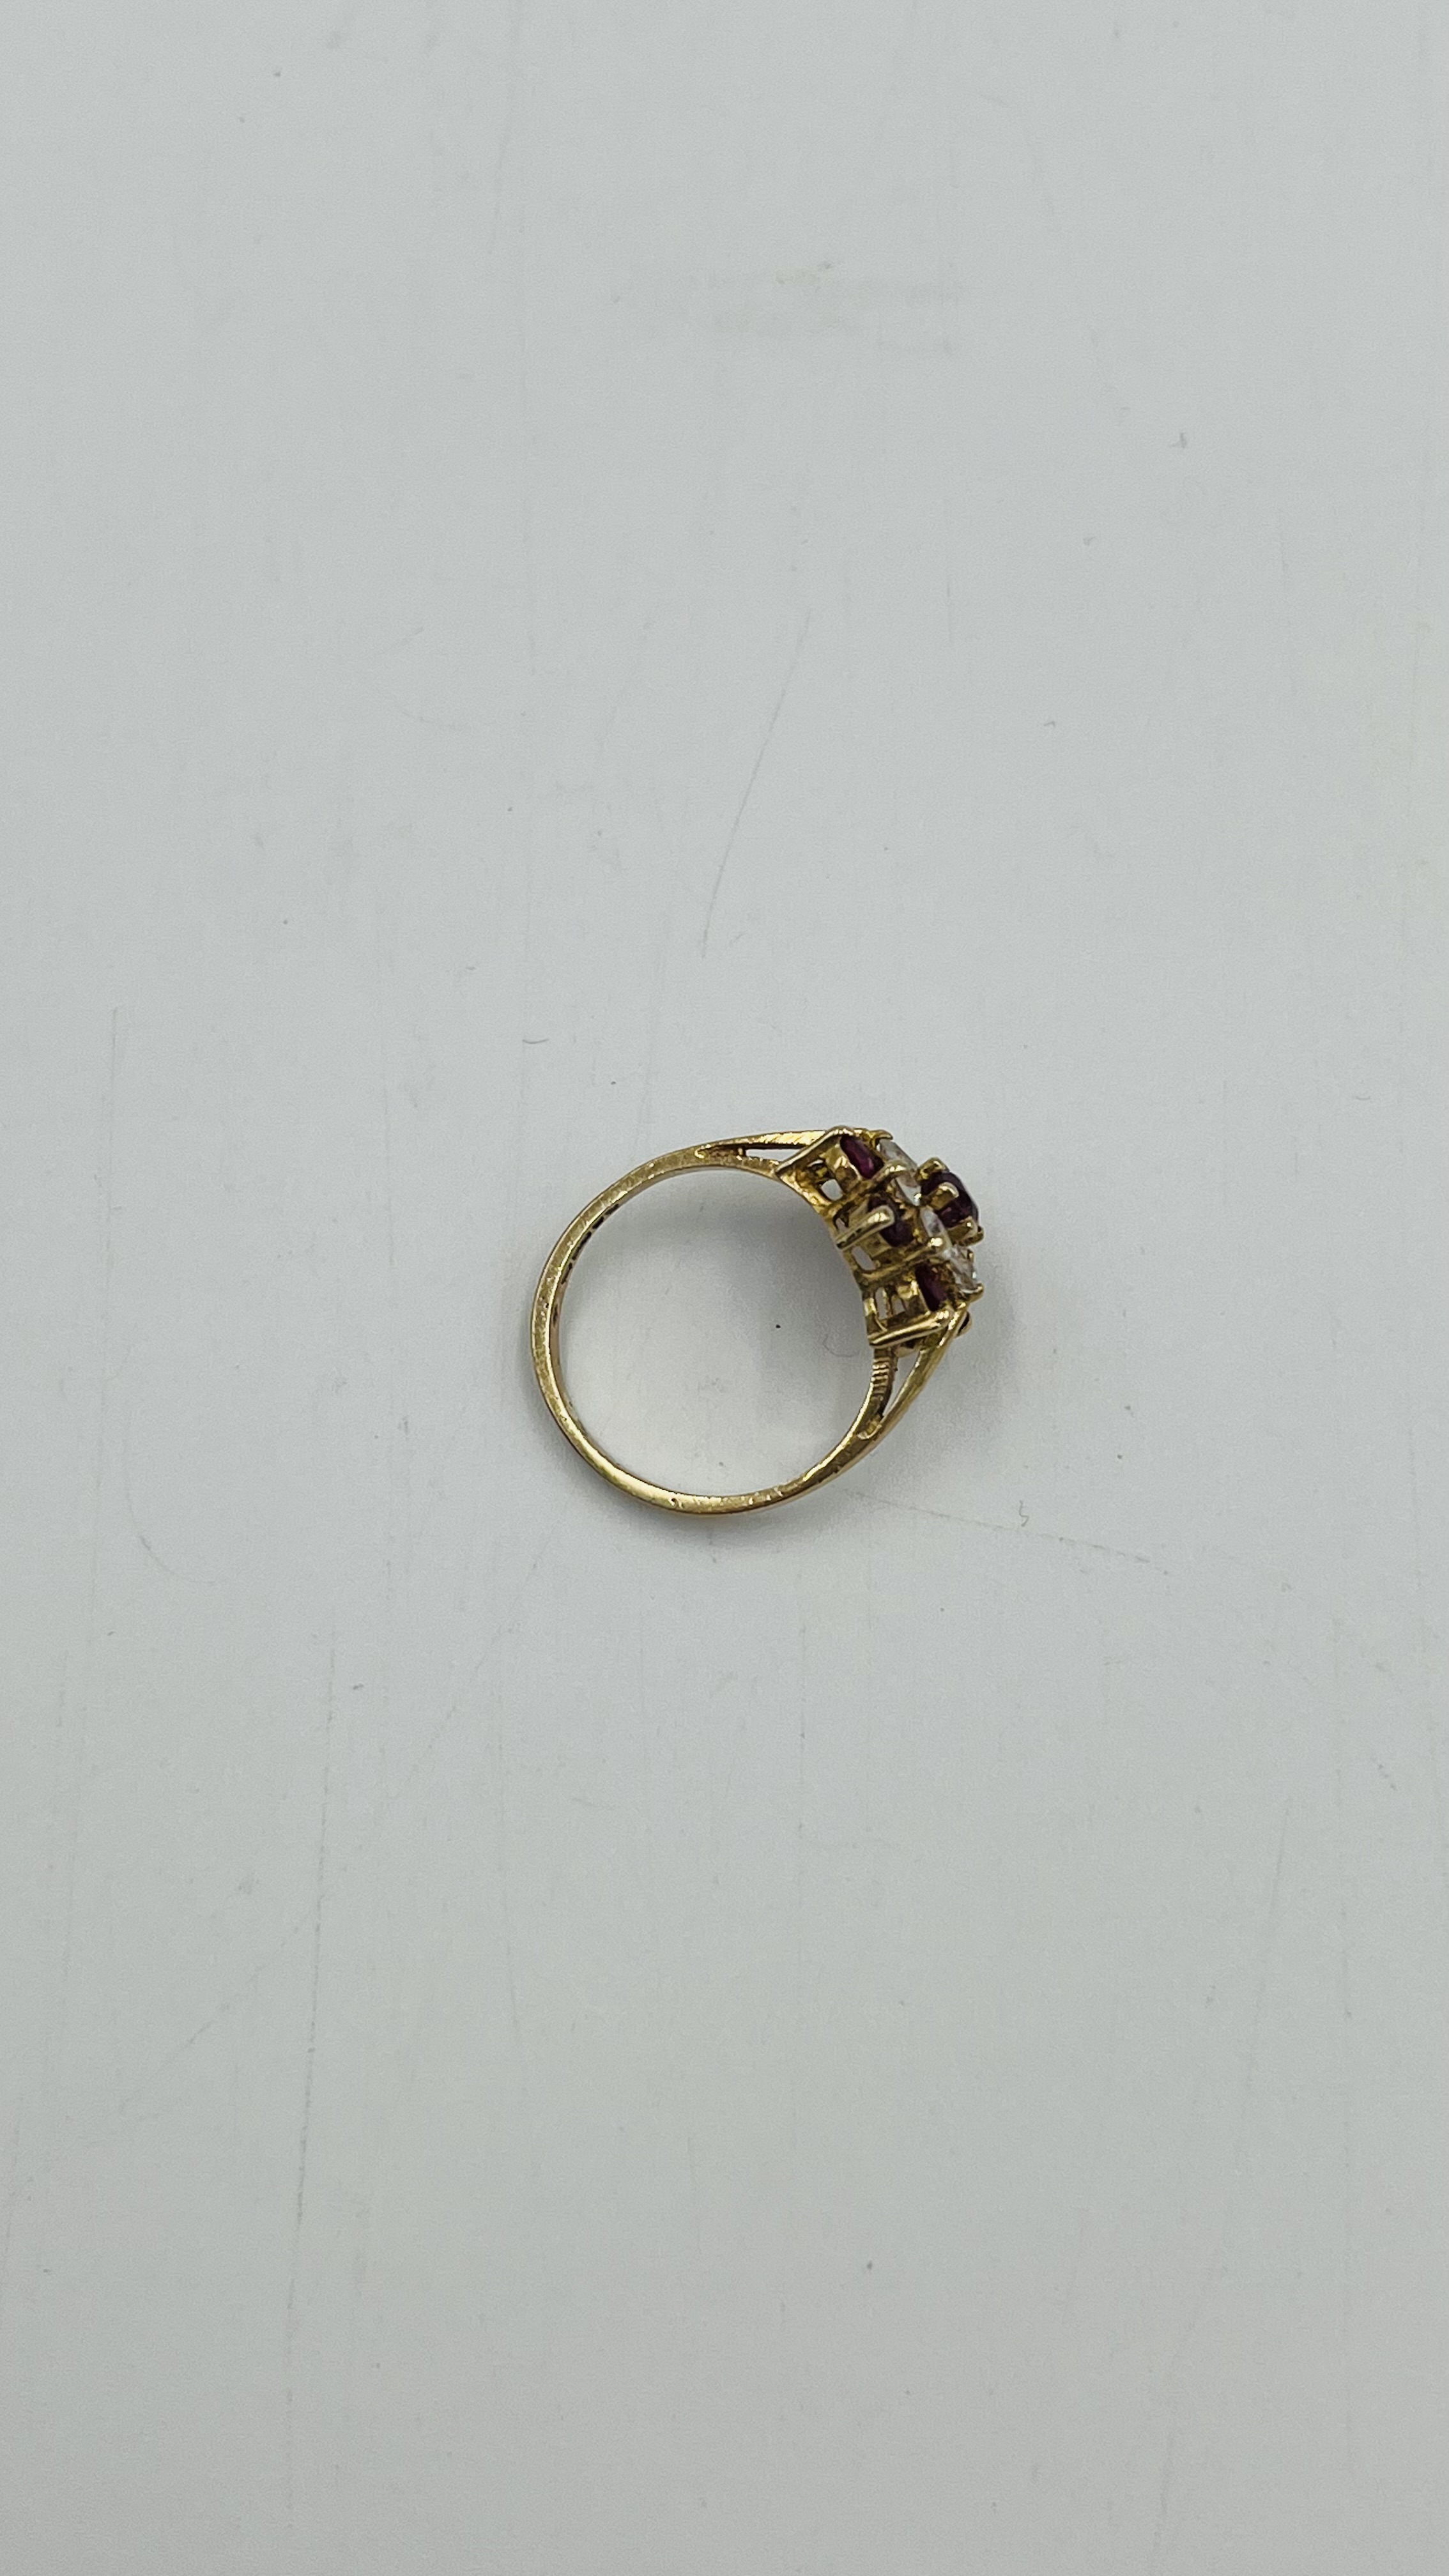 9ct gold daisy ring - Image 6 of 7